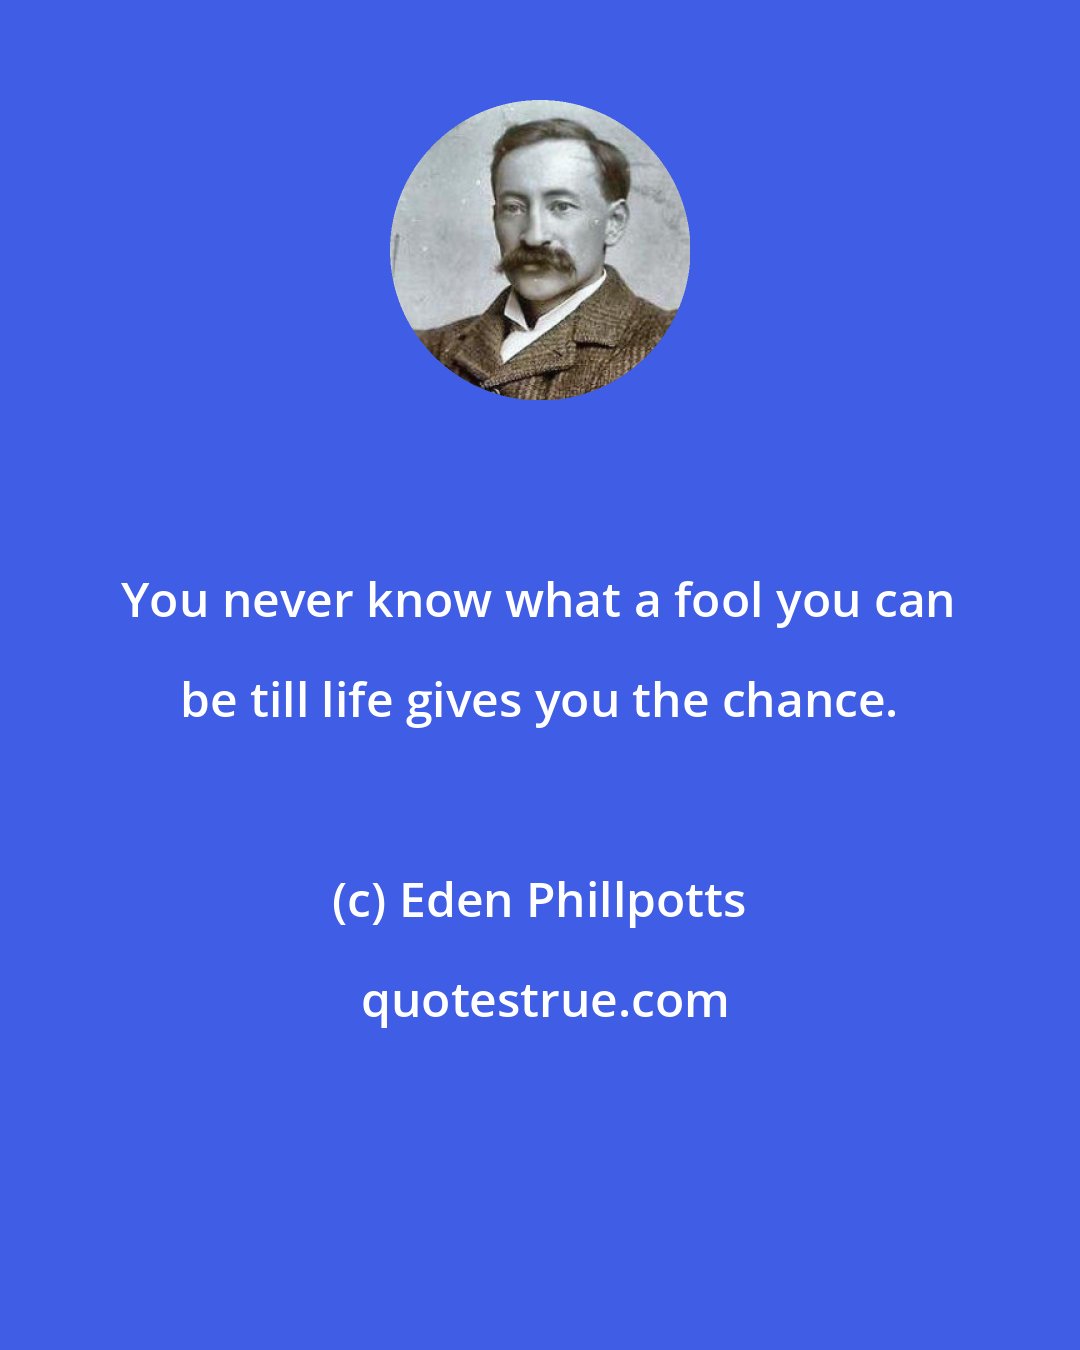 Eden Phillpotts: You never know what a fool you can be till life gives you the chance.